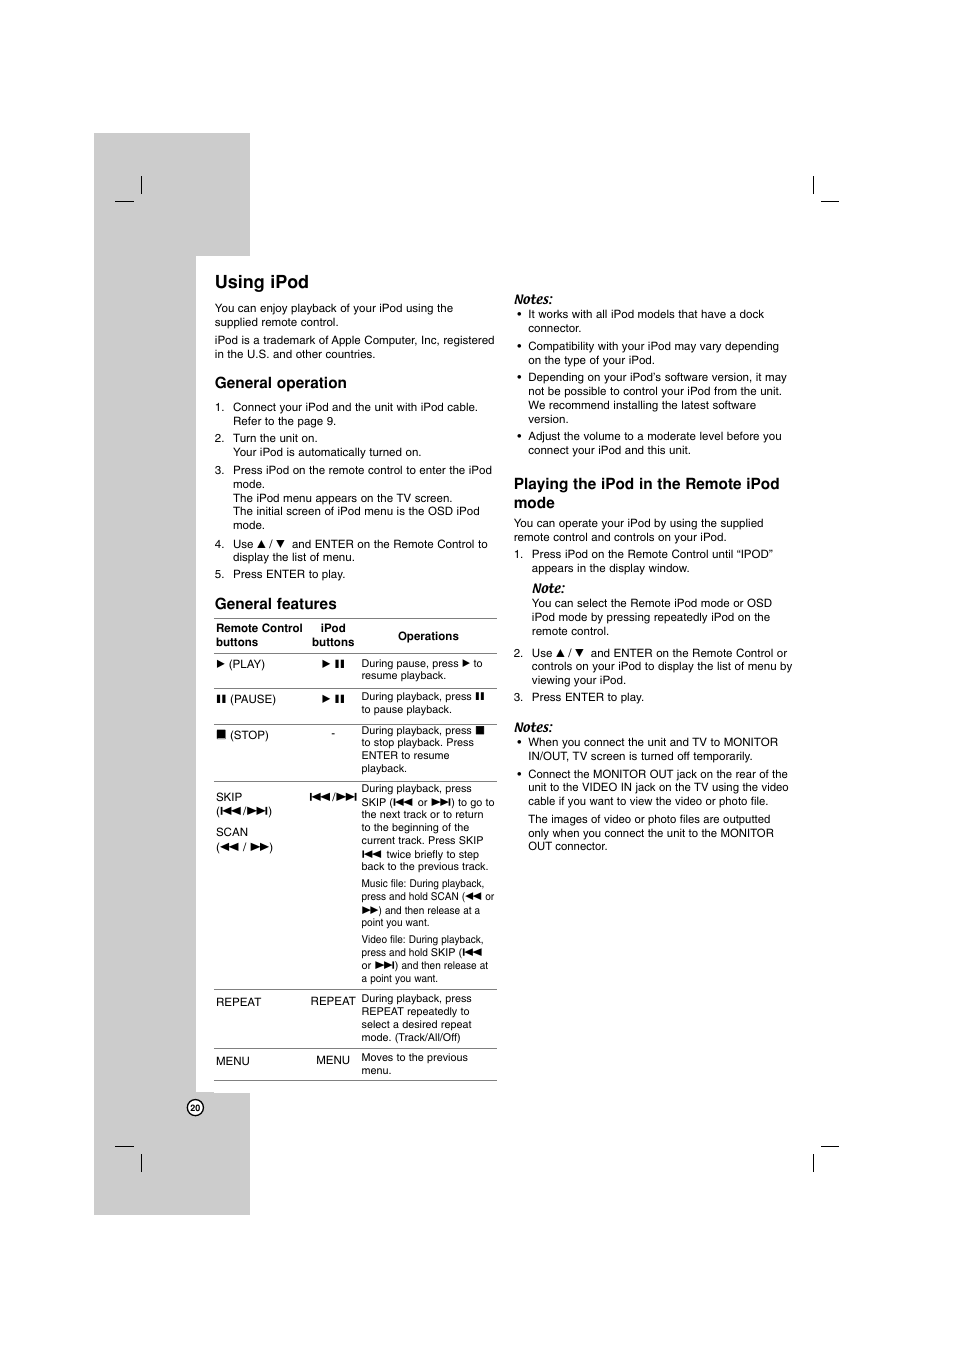 Using ipod, General operation, General features | Playing the ipod in the remote ipod mode | LG LHT799 User Manual | Page 20 / 33